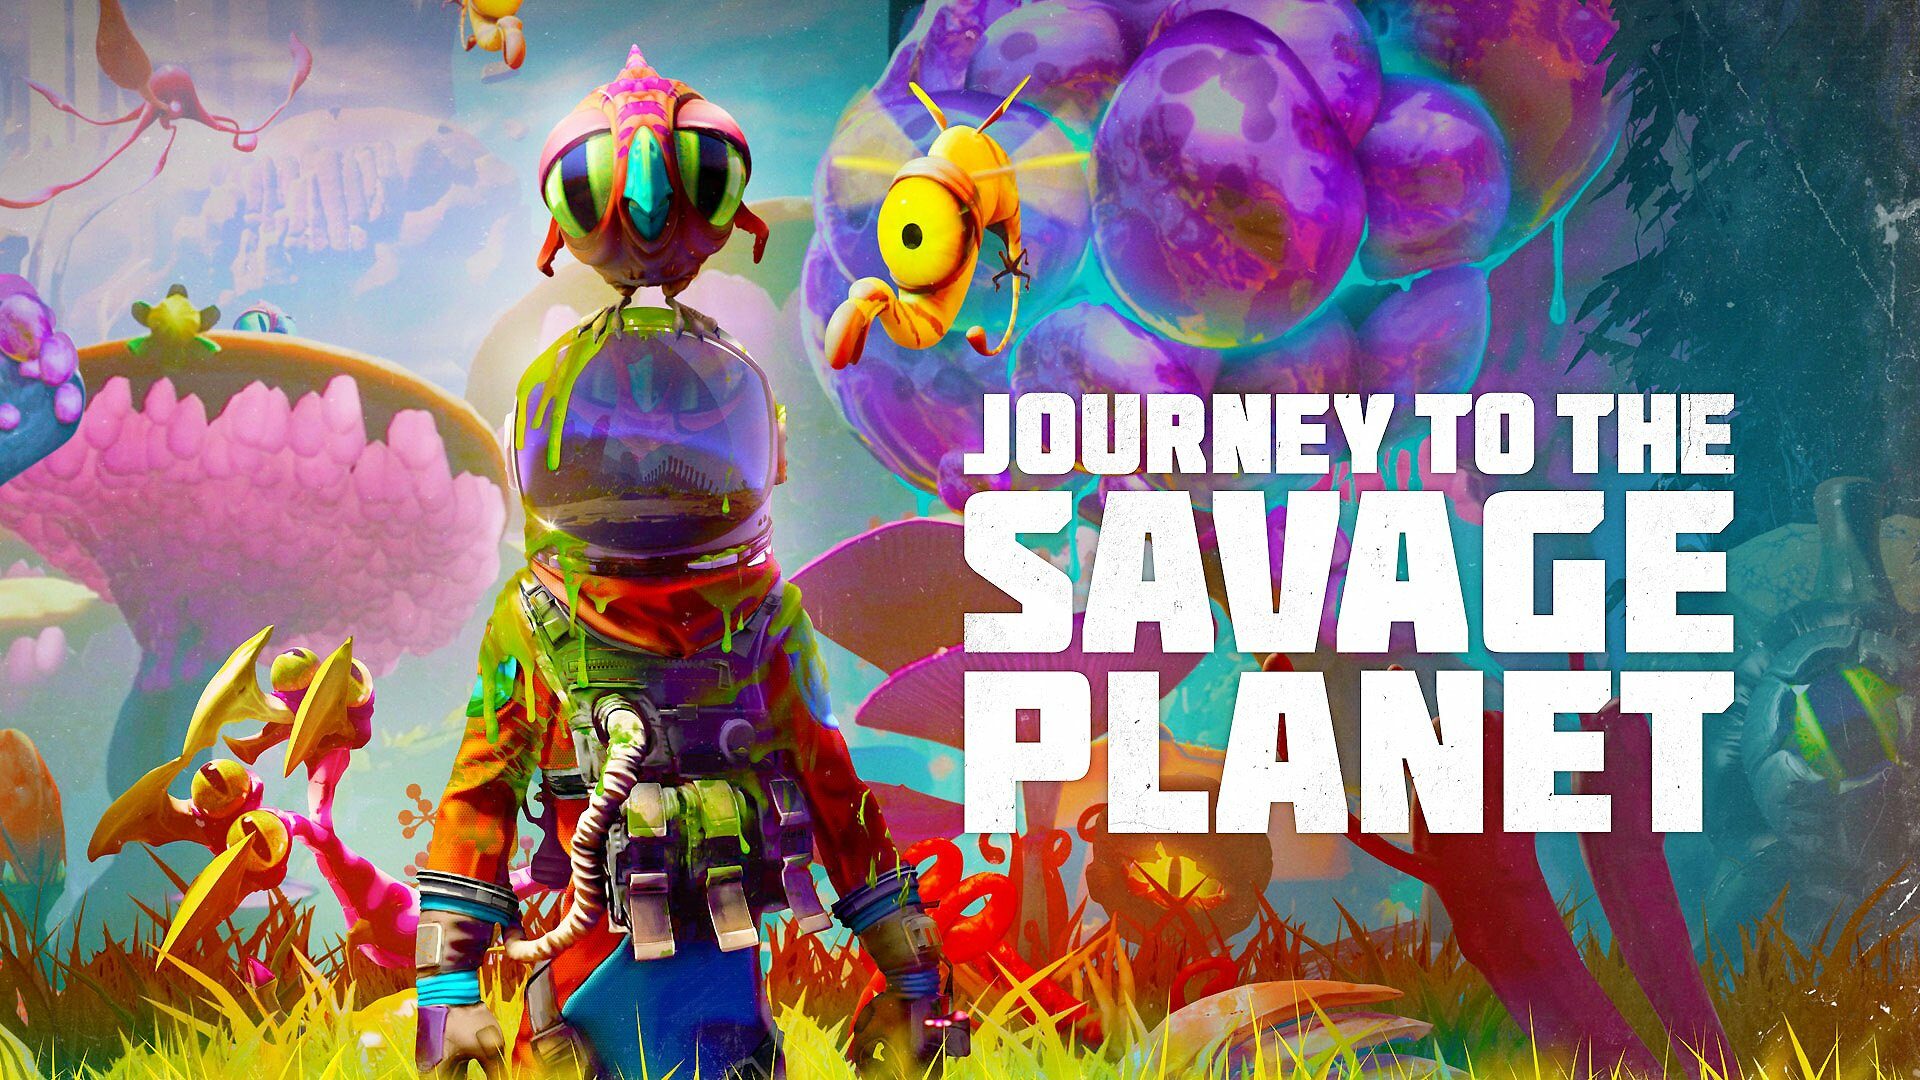 january-2020-pc-games-journey-to-the-savage-planet-6257290